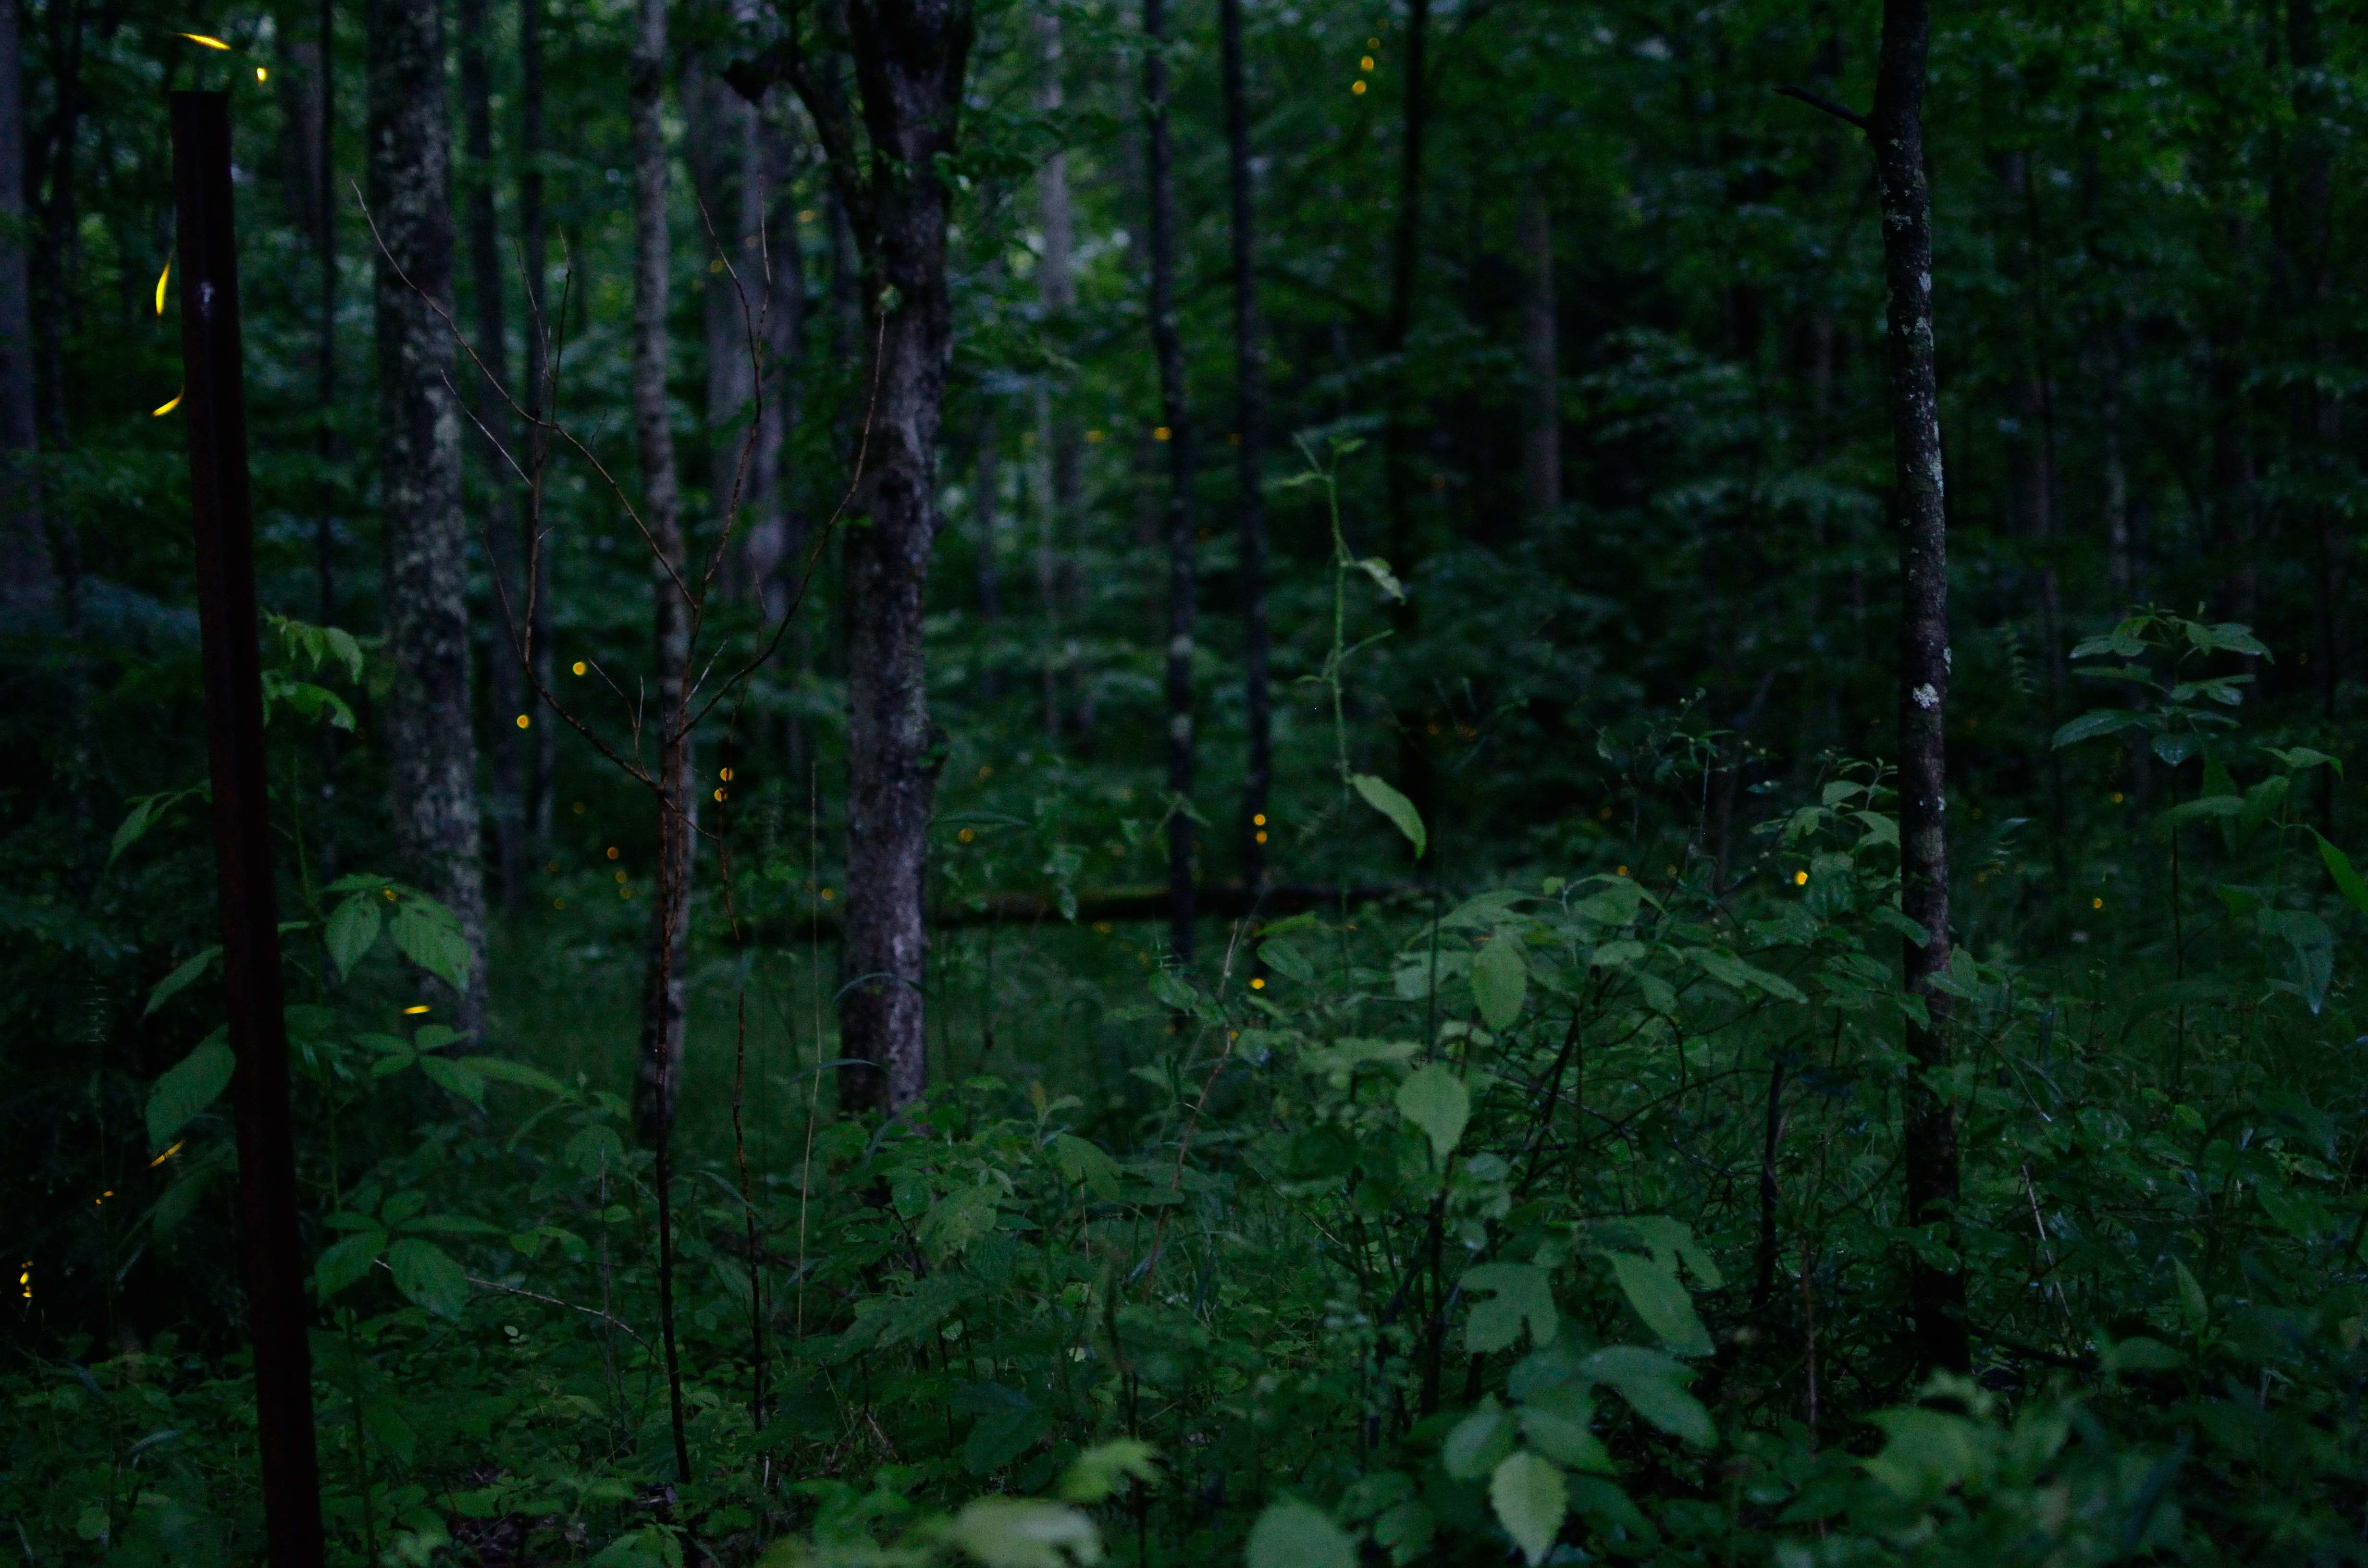 Synchronous Fireflies in Great Smoky National Park